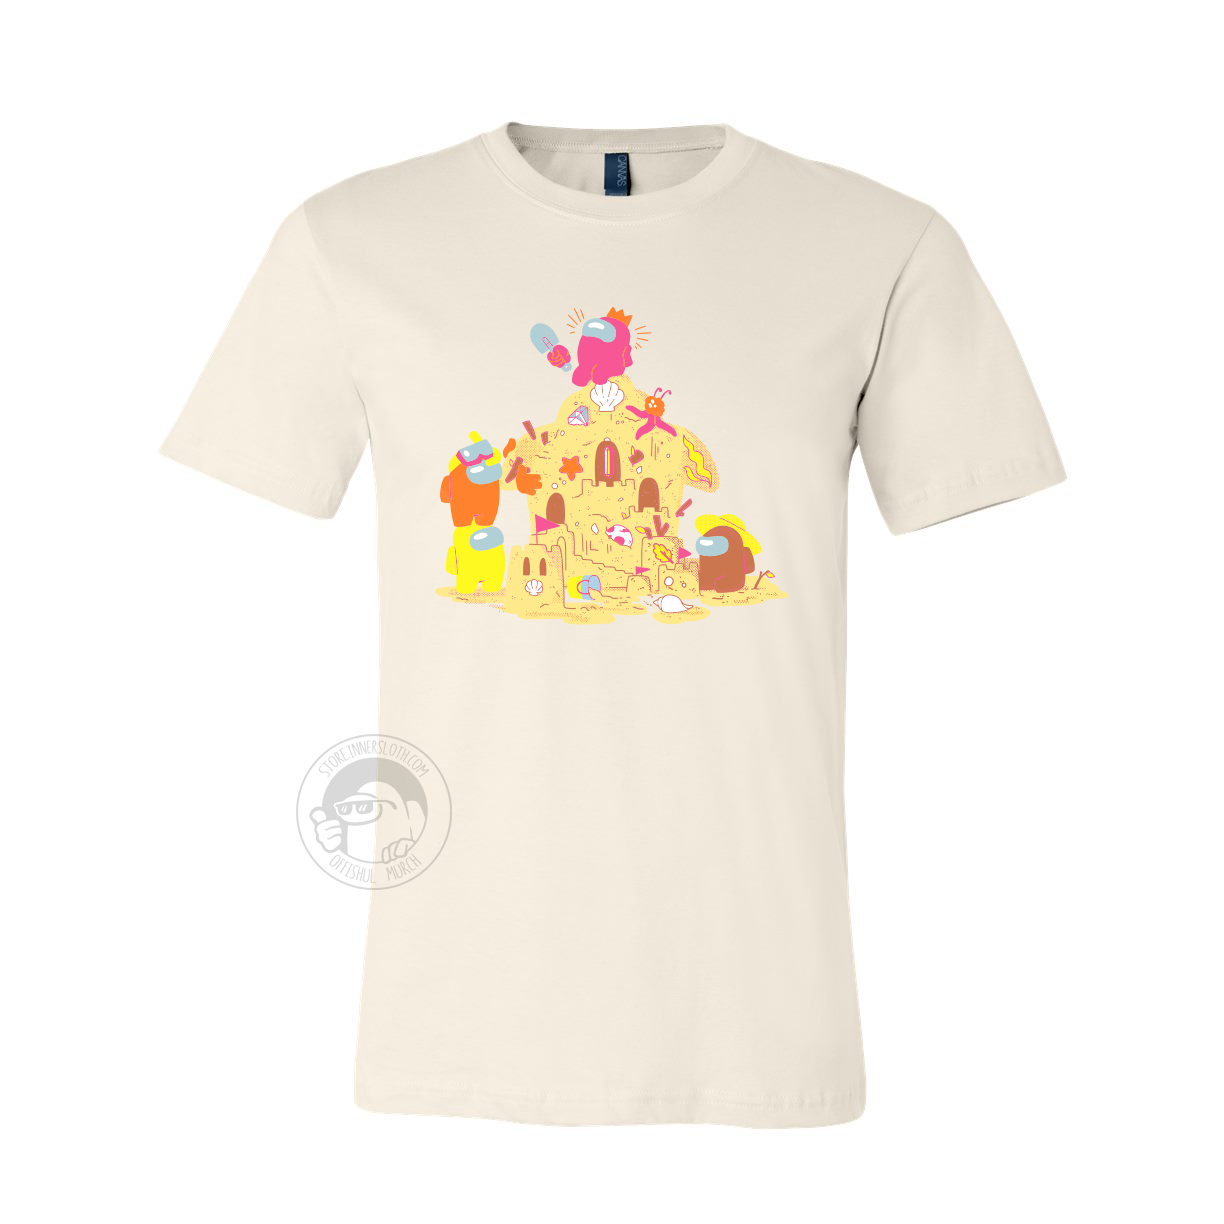 A product photo of the Among Us: Sandcastle Tee in Natural. The t-shirt is light beige and shows four crewmates building a sandcastle, which vaguely resembles the Airship. A pink crewmate wearing a crown hat sits at the top of the castle.